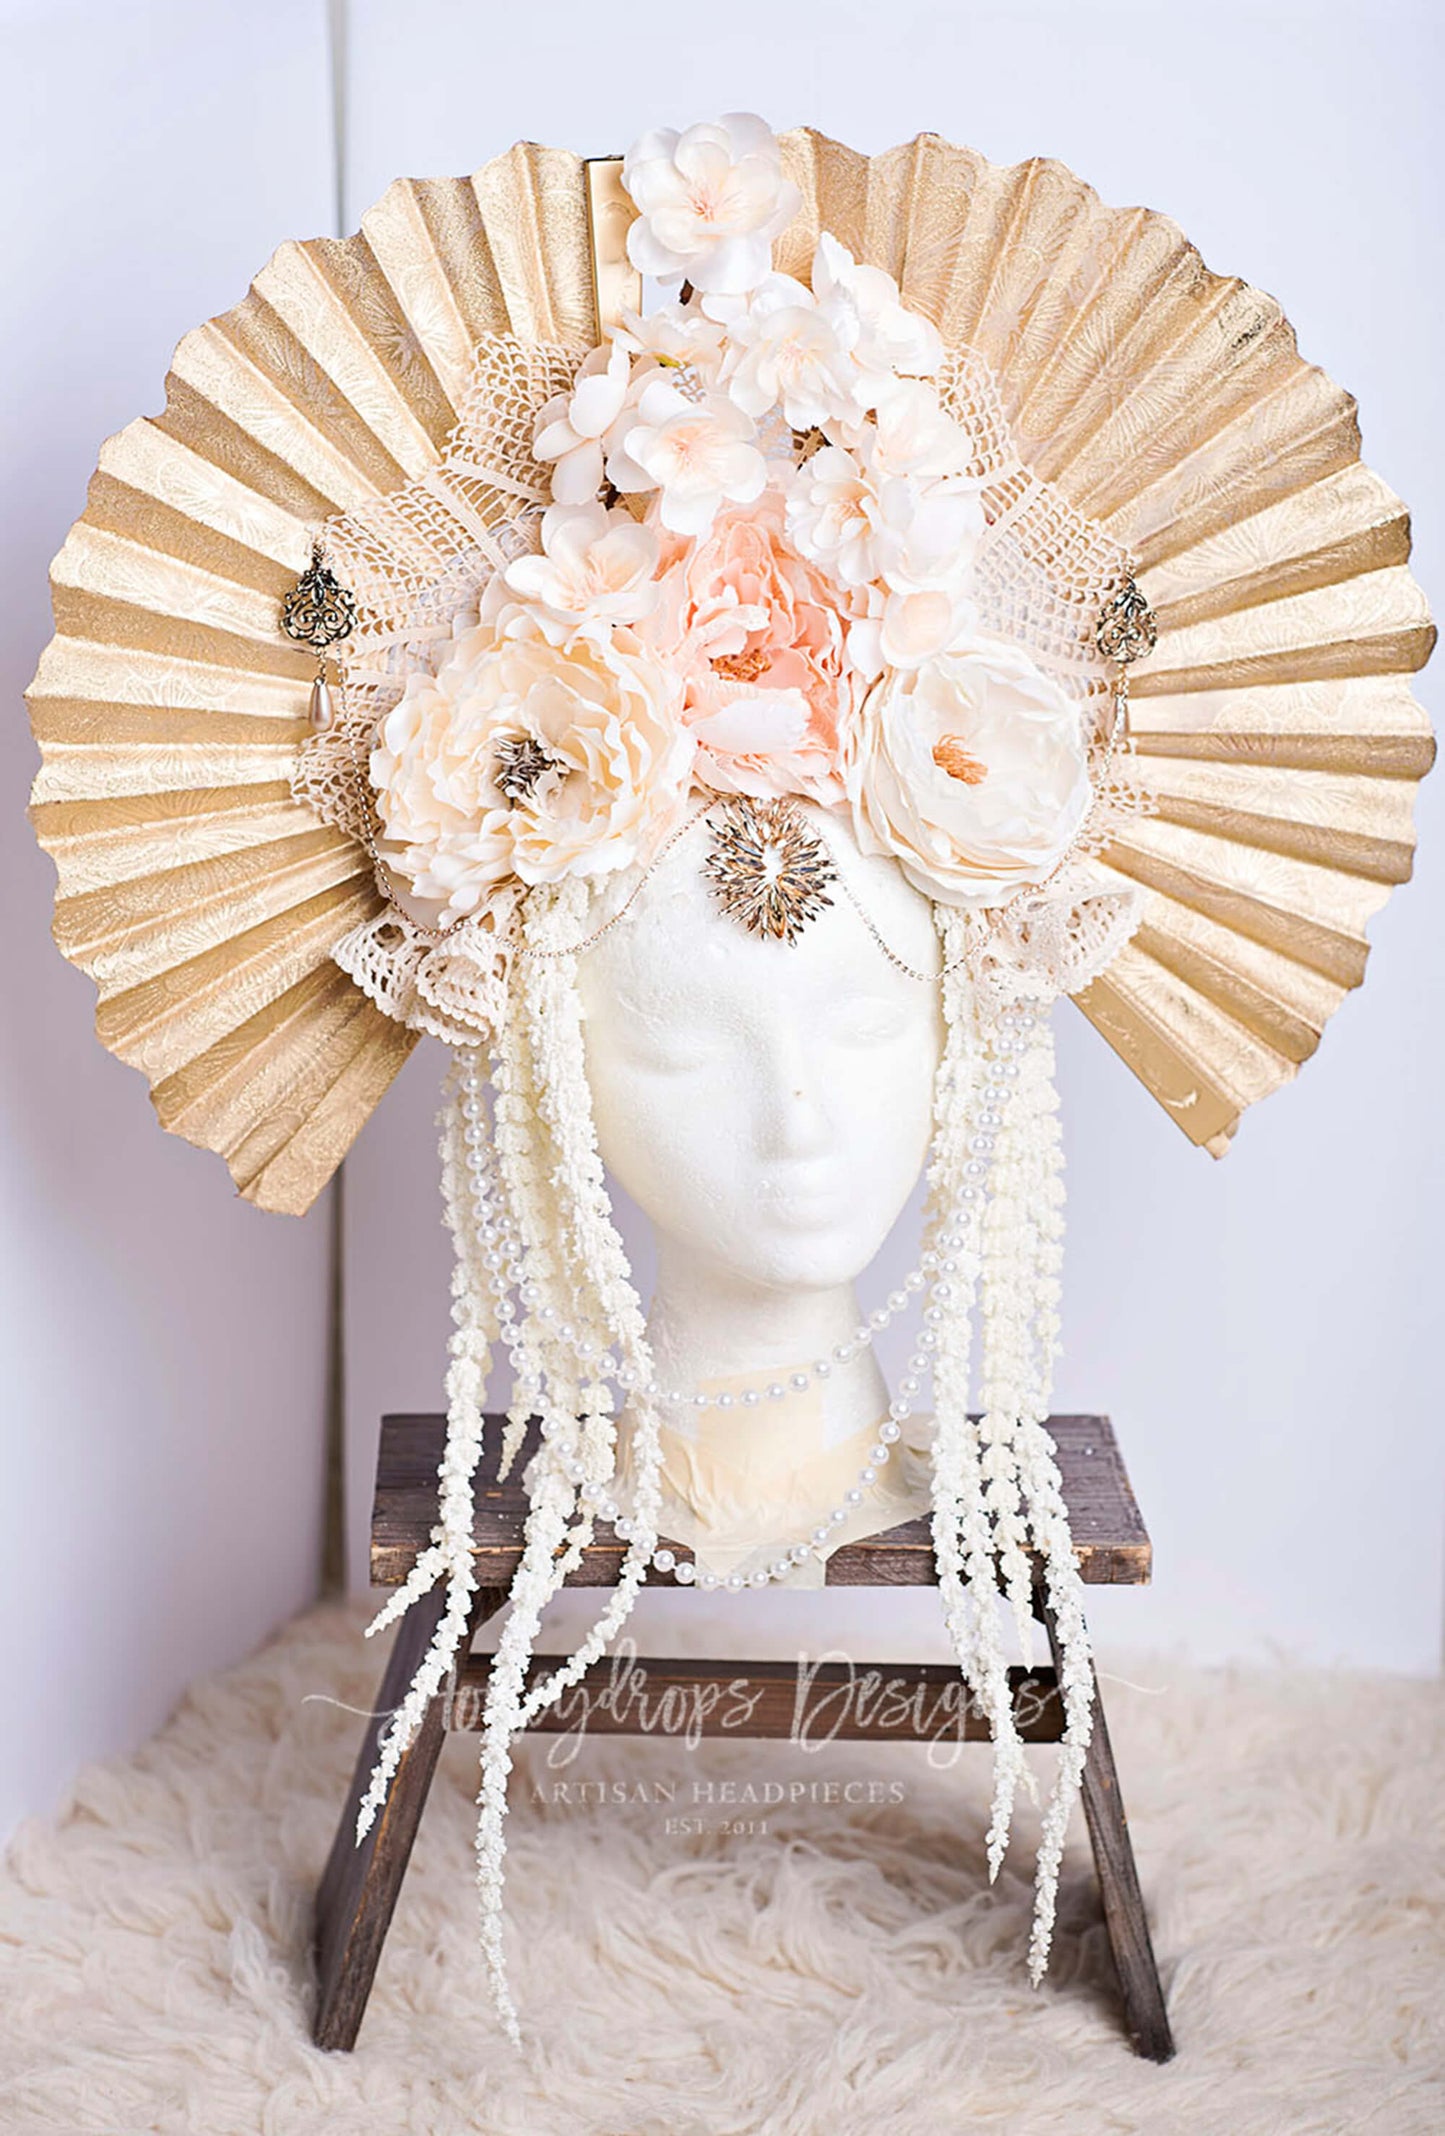 Empress of the Rose Couture Headpiece - Honeydrops Designs